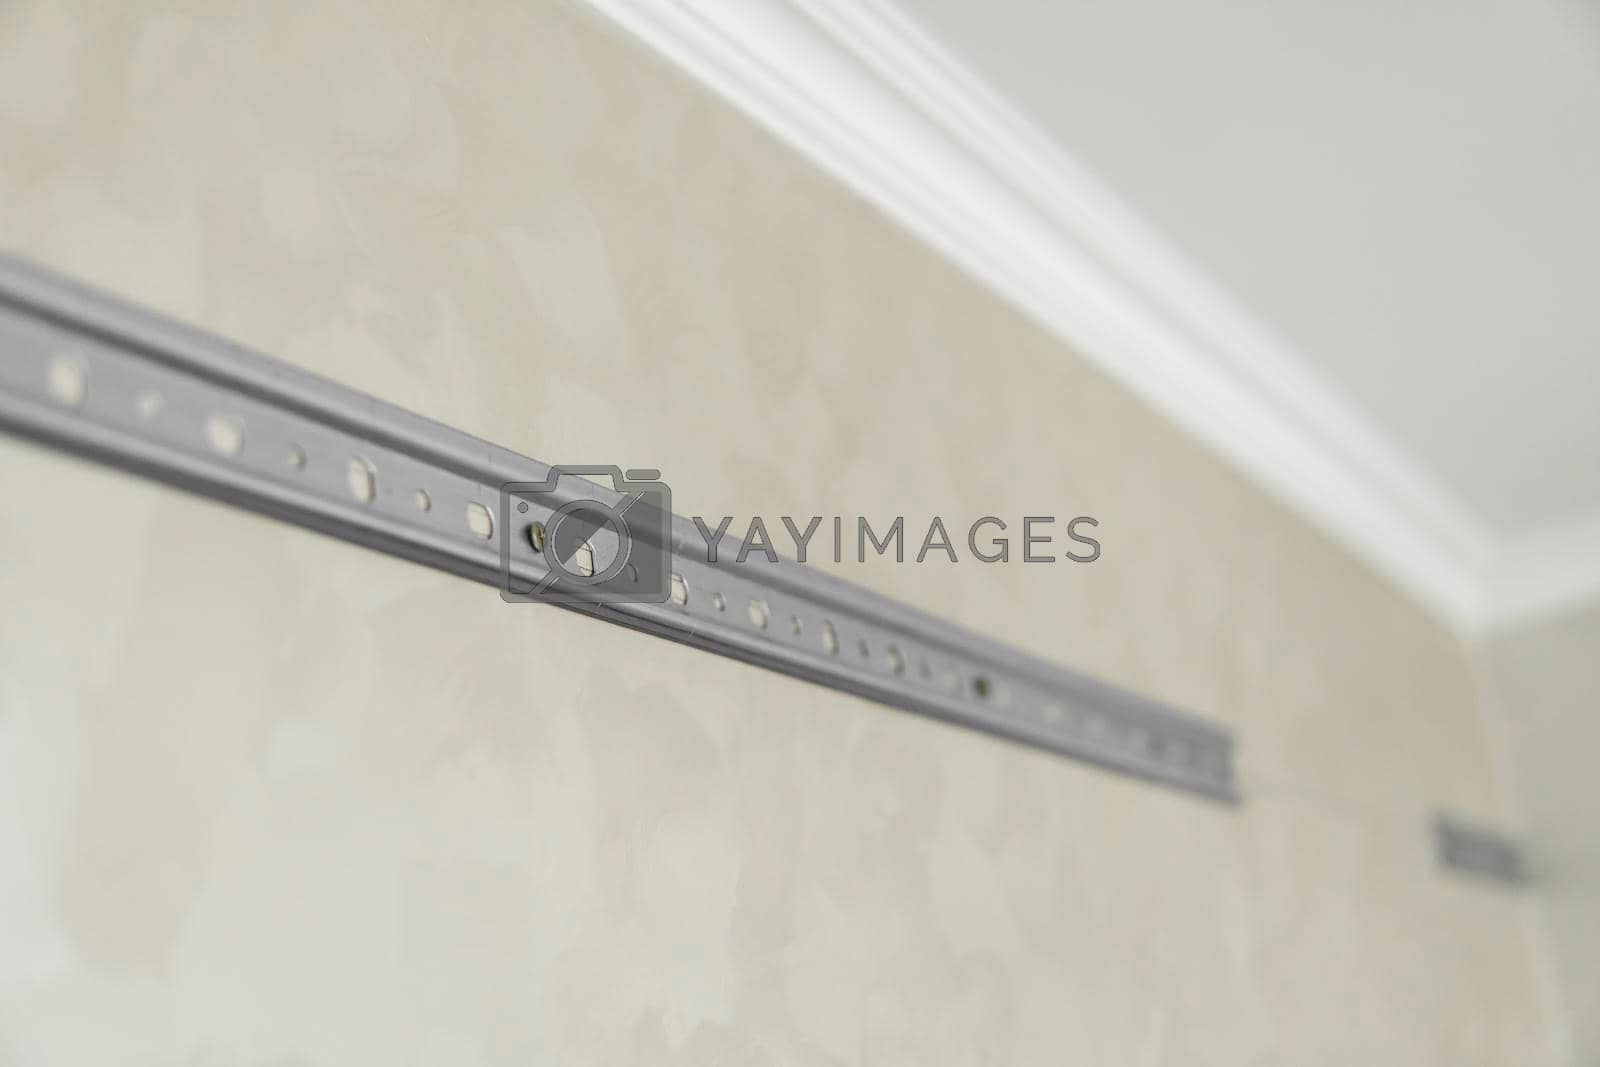 Royalty free image of Close-up of stainless steel mounting rail for mounting kitchen cabinets on a wall. by vovsht